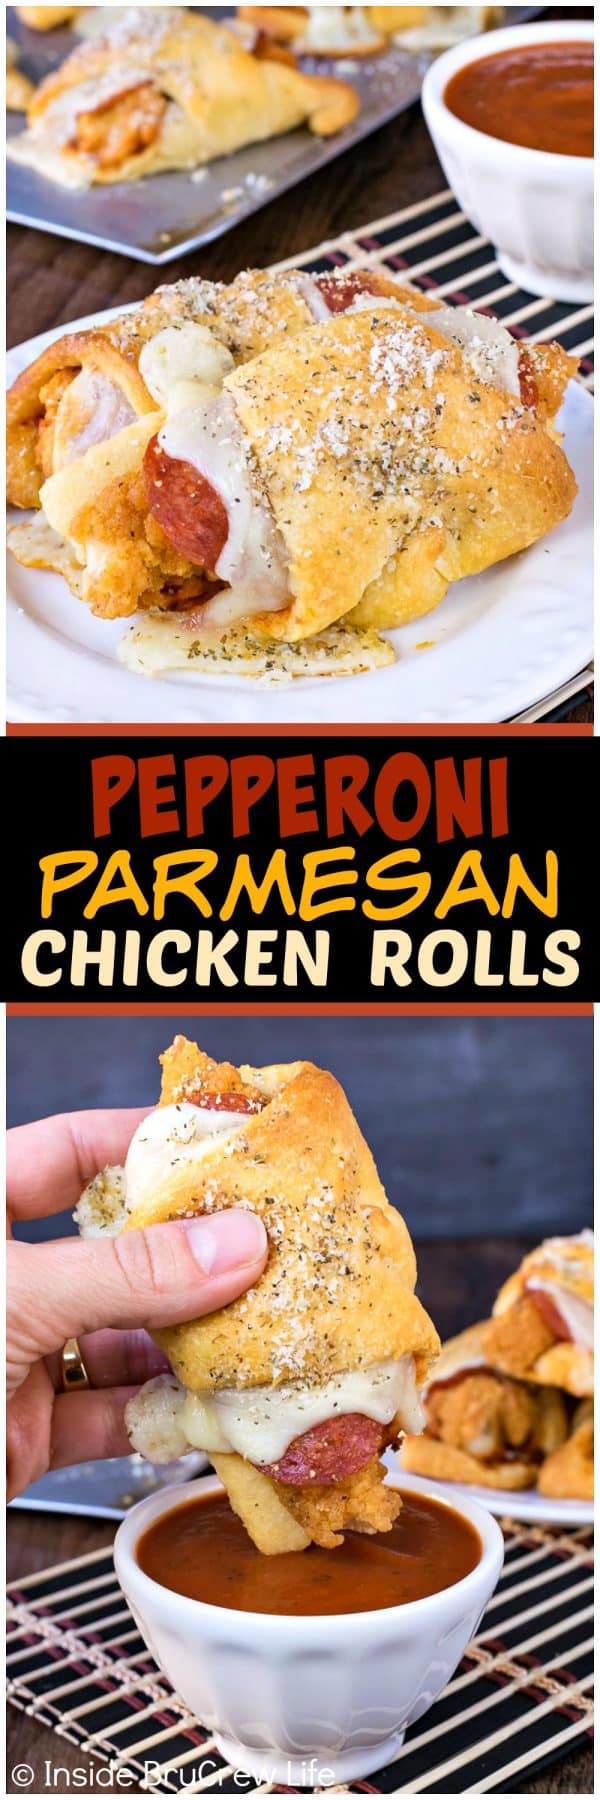 2 pictures of chicken rolls divided by a text box.